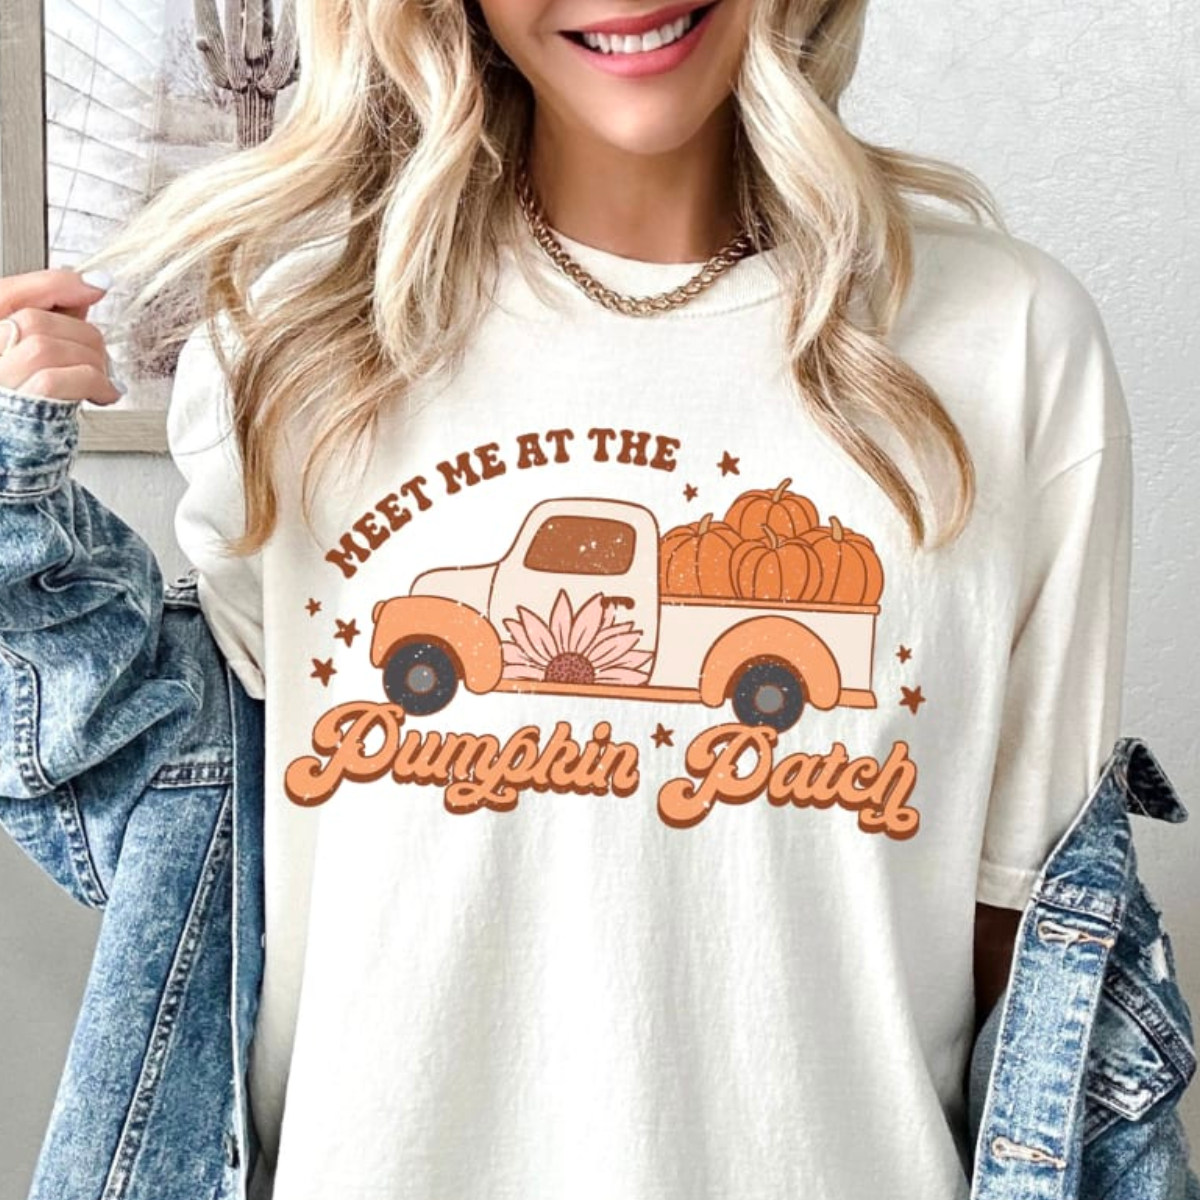 Cute Graphic Tees For Women